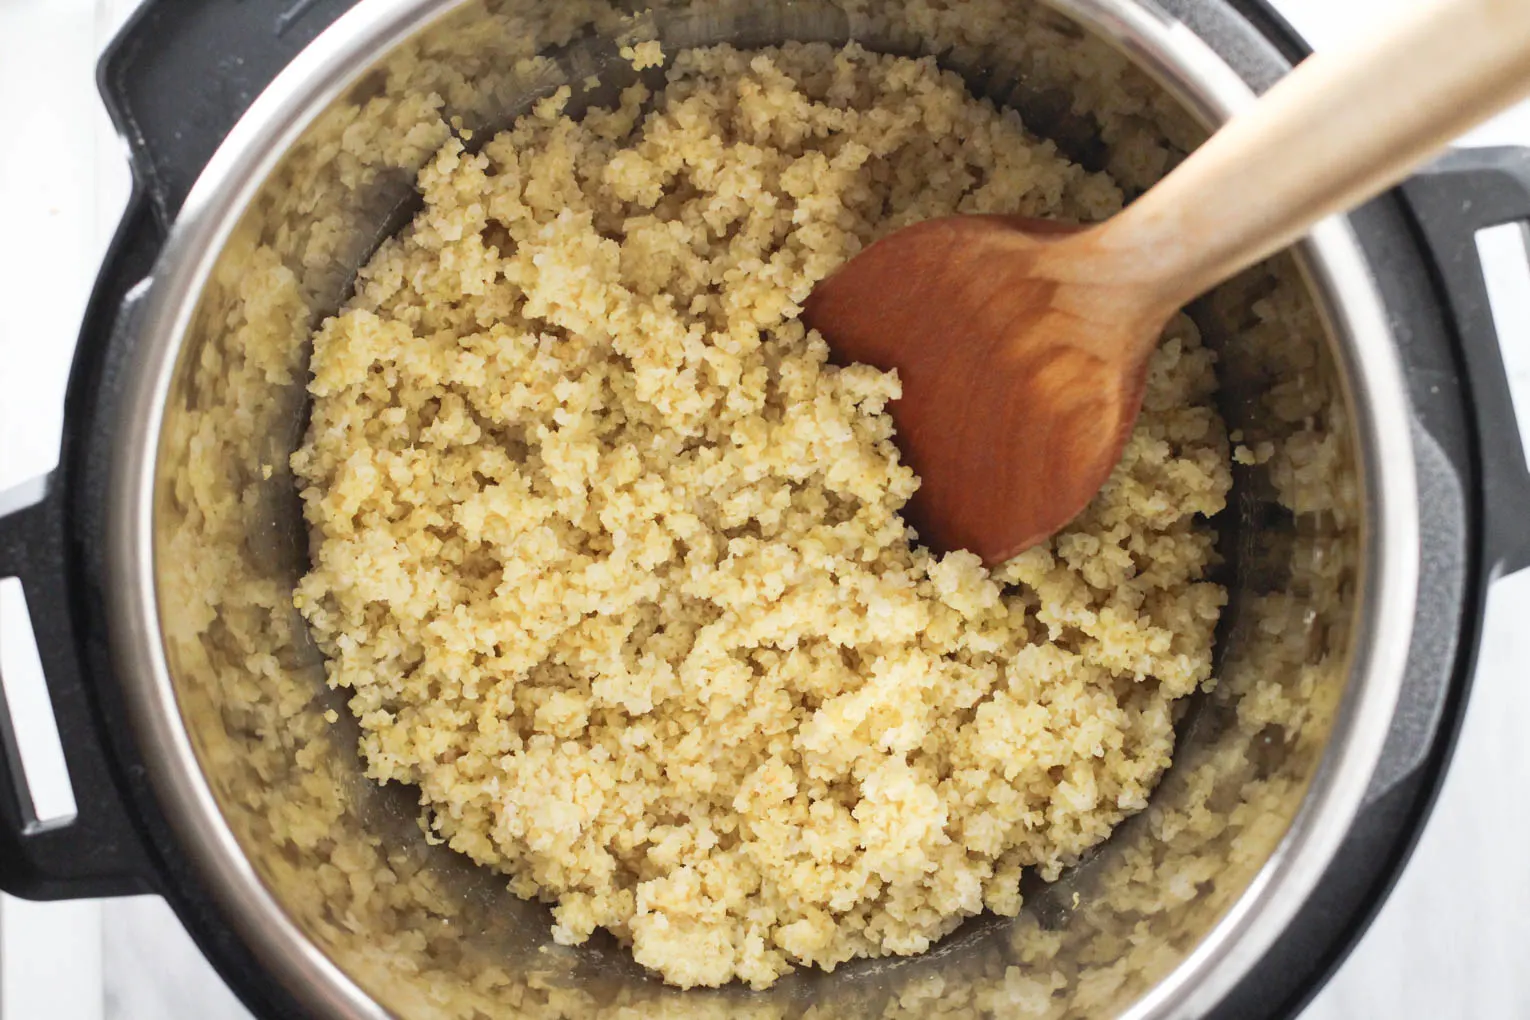 Cooked millet inside an Instant Pot with a wooden spatula in the millet.